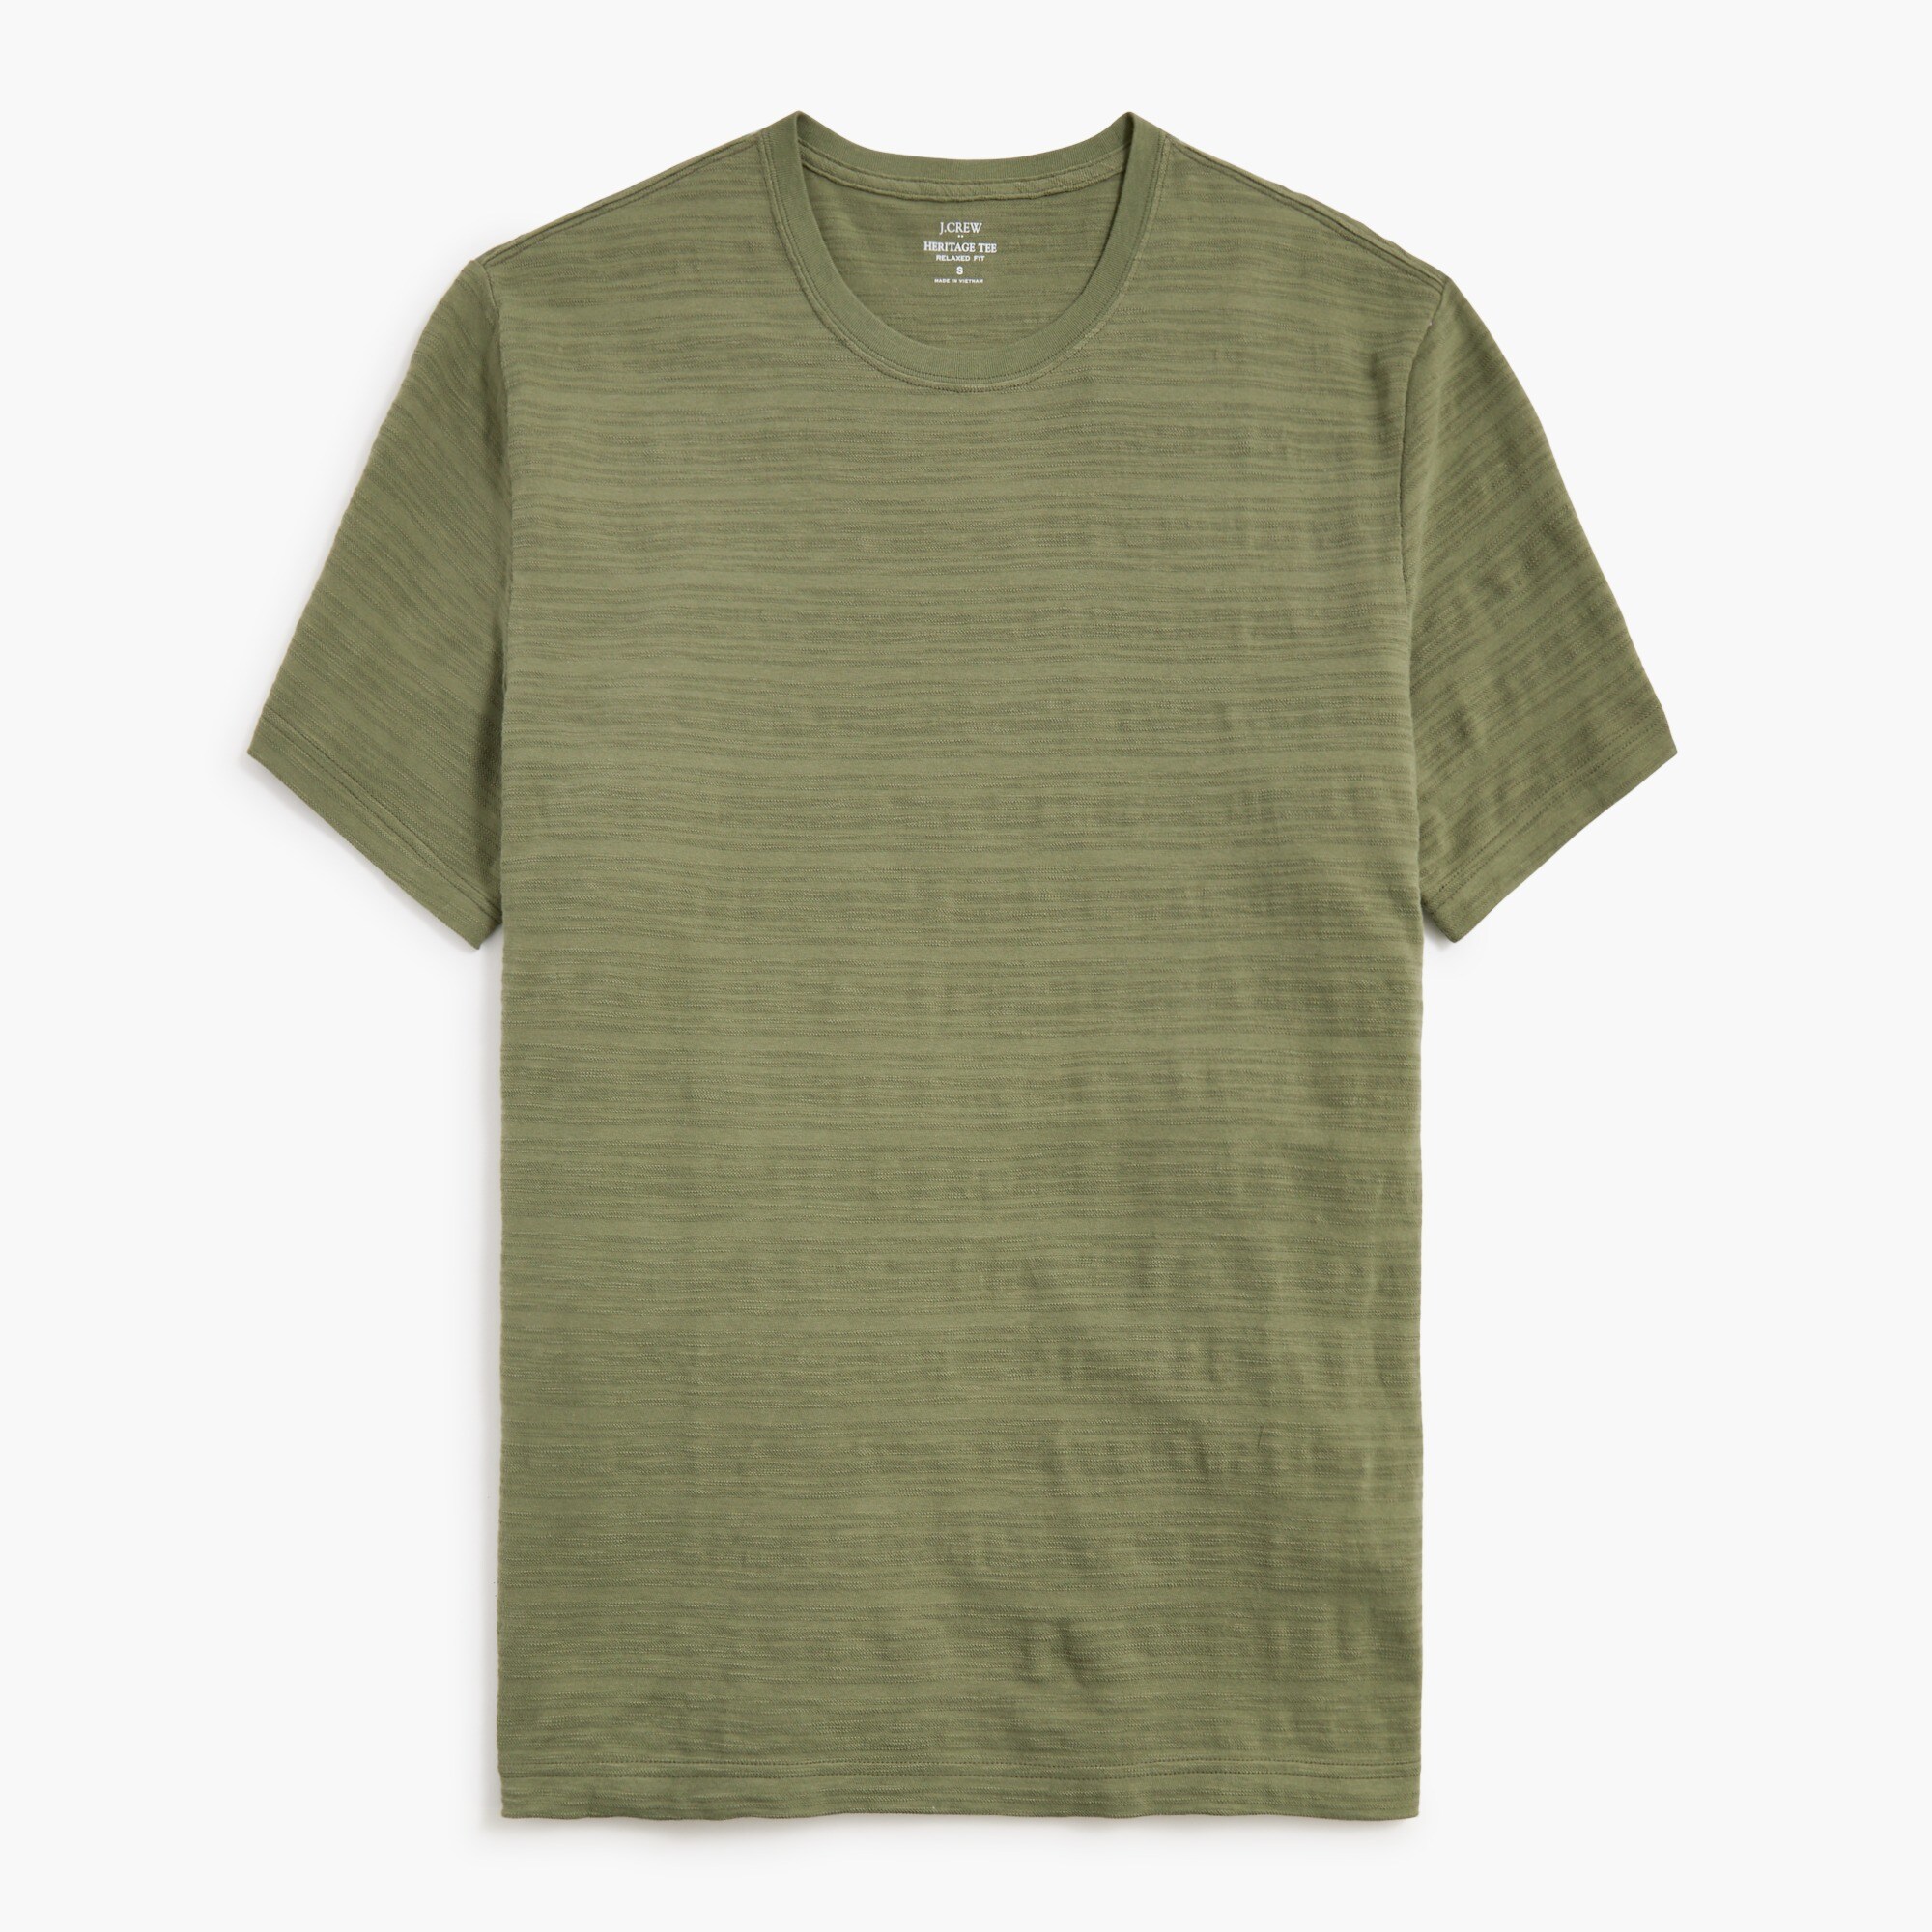  Textured heritage tee in relaxed fit